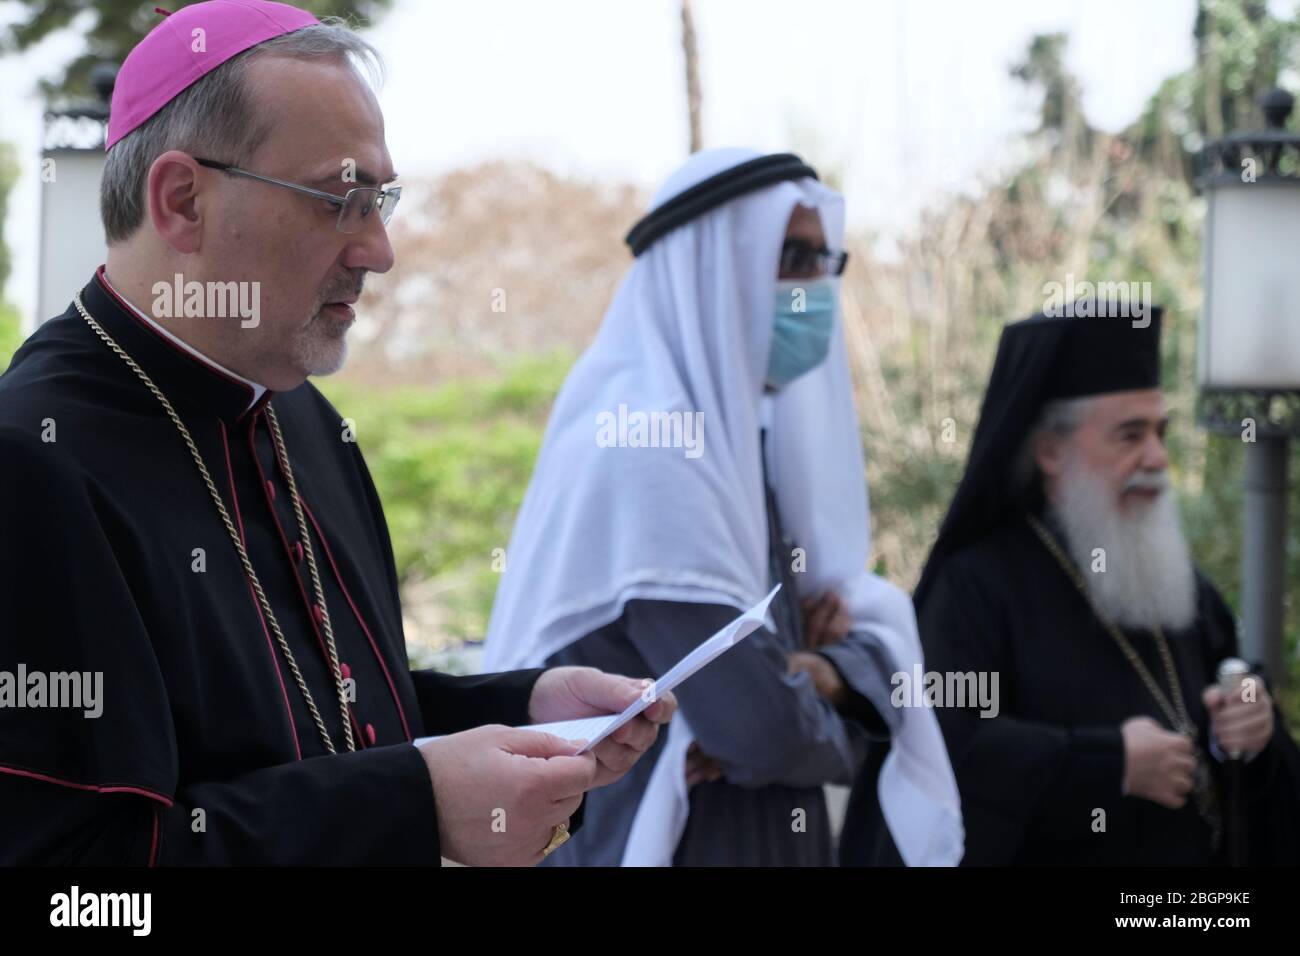 Jerusalem, Israel. 22nd Apr, 2020. Jewish, Christian, Muslim and Druze religious leaders holding an interfaith prayer for the victims and protection from COVID-19 coronavirus pandemic in Jerusalem, Israel. Stock Photo